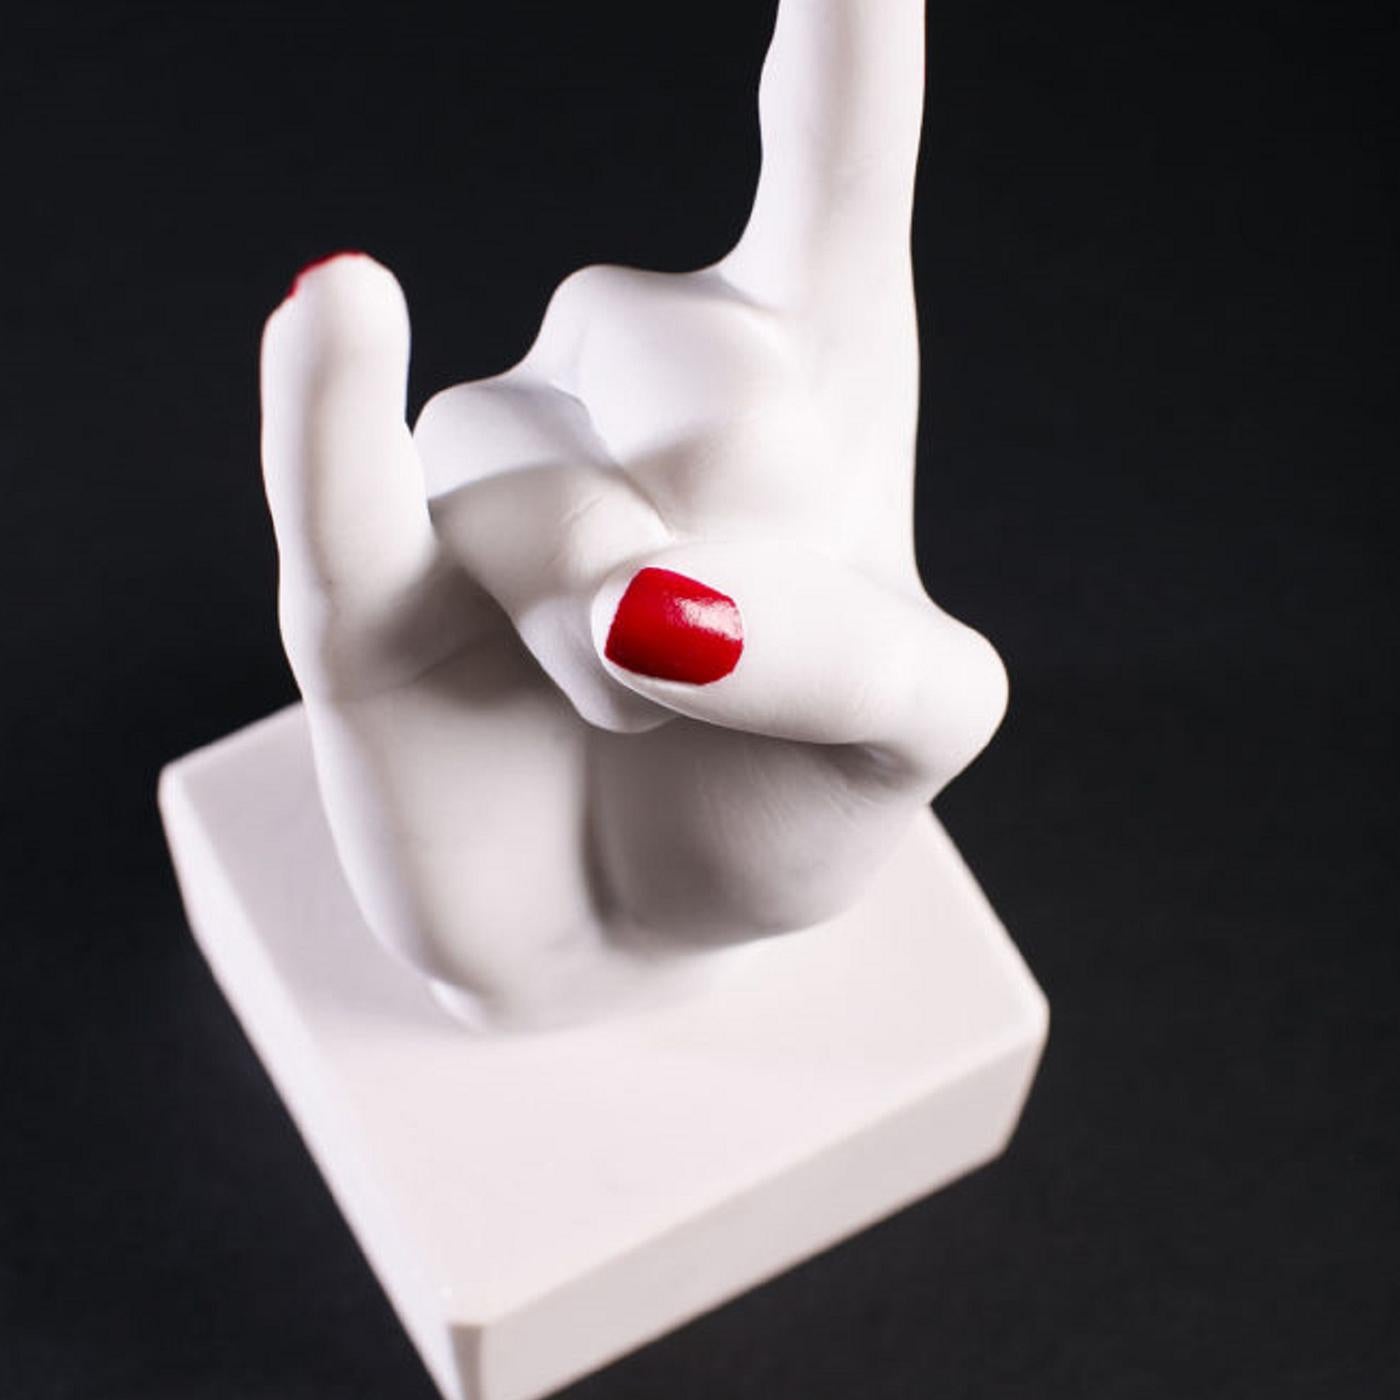 Provocative and unconventional, this sculpture is crafted entirely by hand of white Carrara marble and is supported on a cubic base of pure white marble. It reinterprets the extending finger, symbol of contempt in Western cultures, substituting it